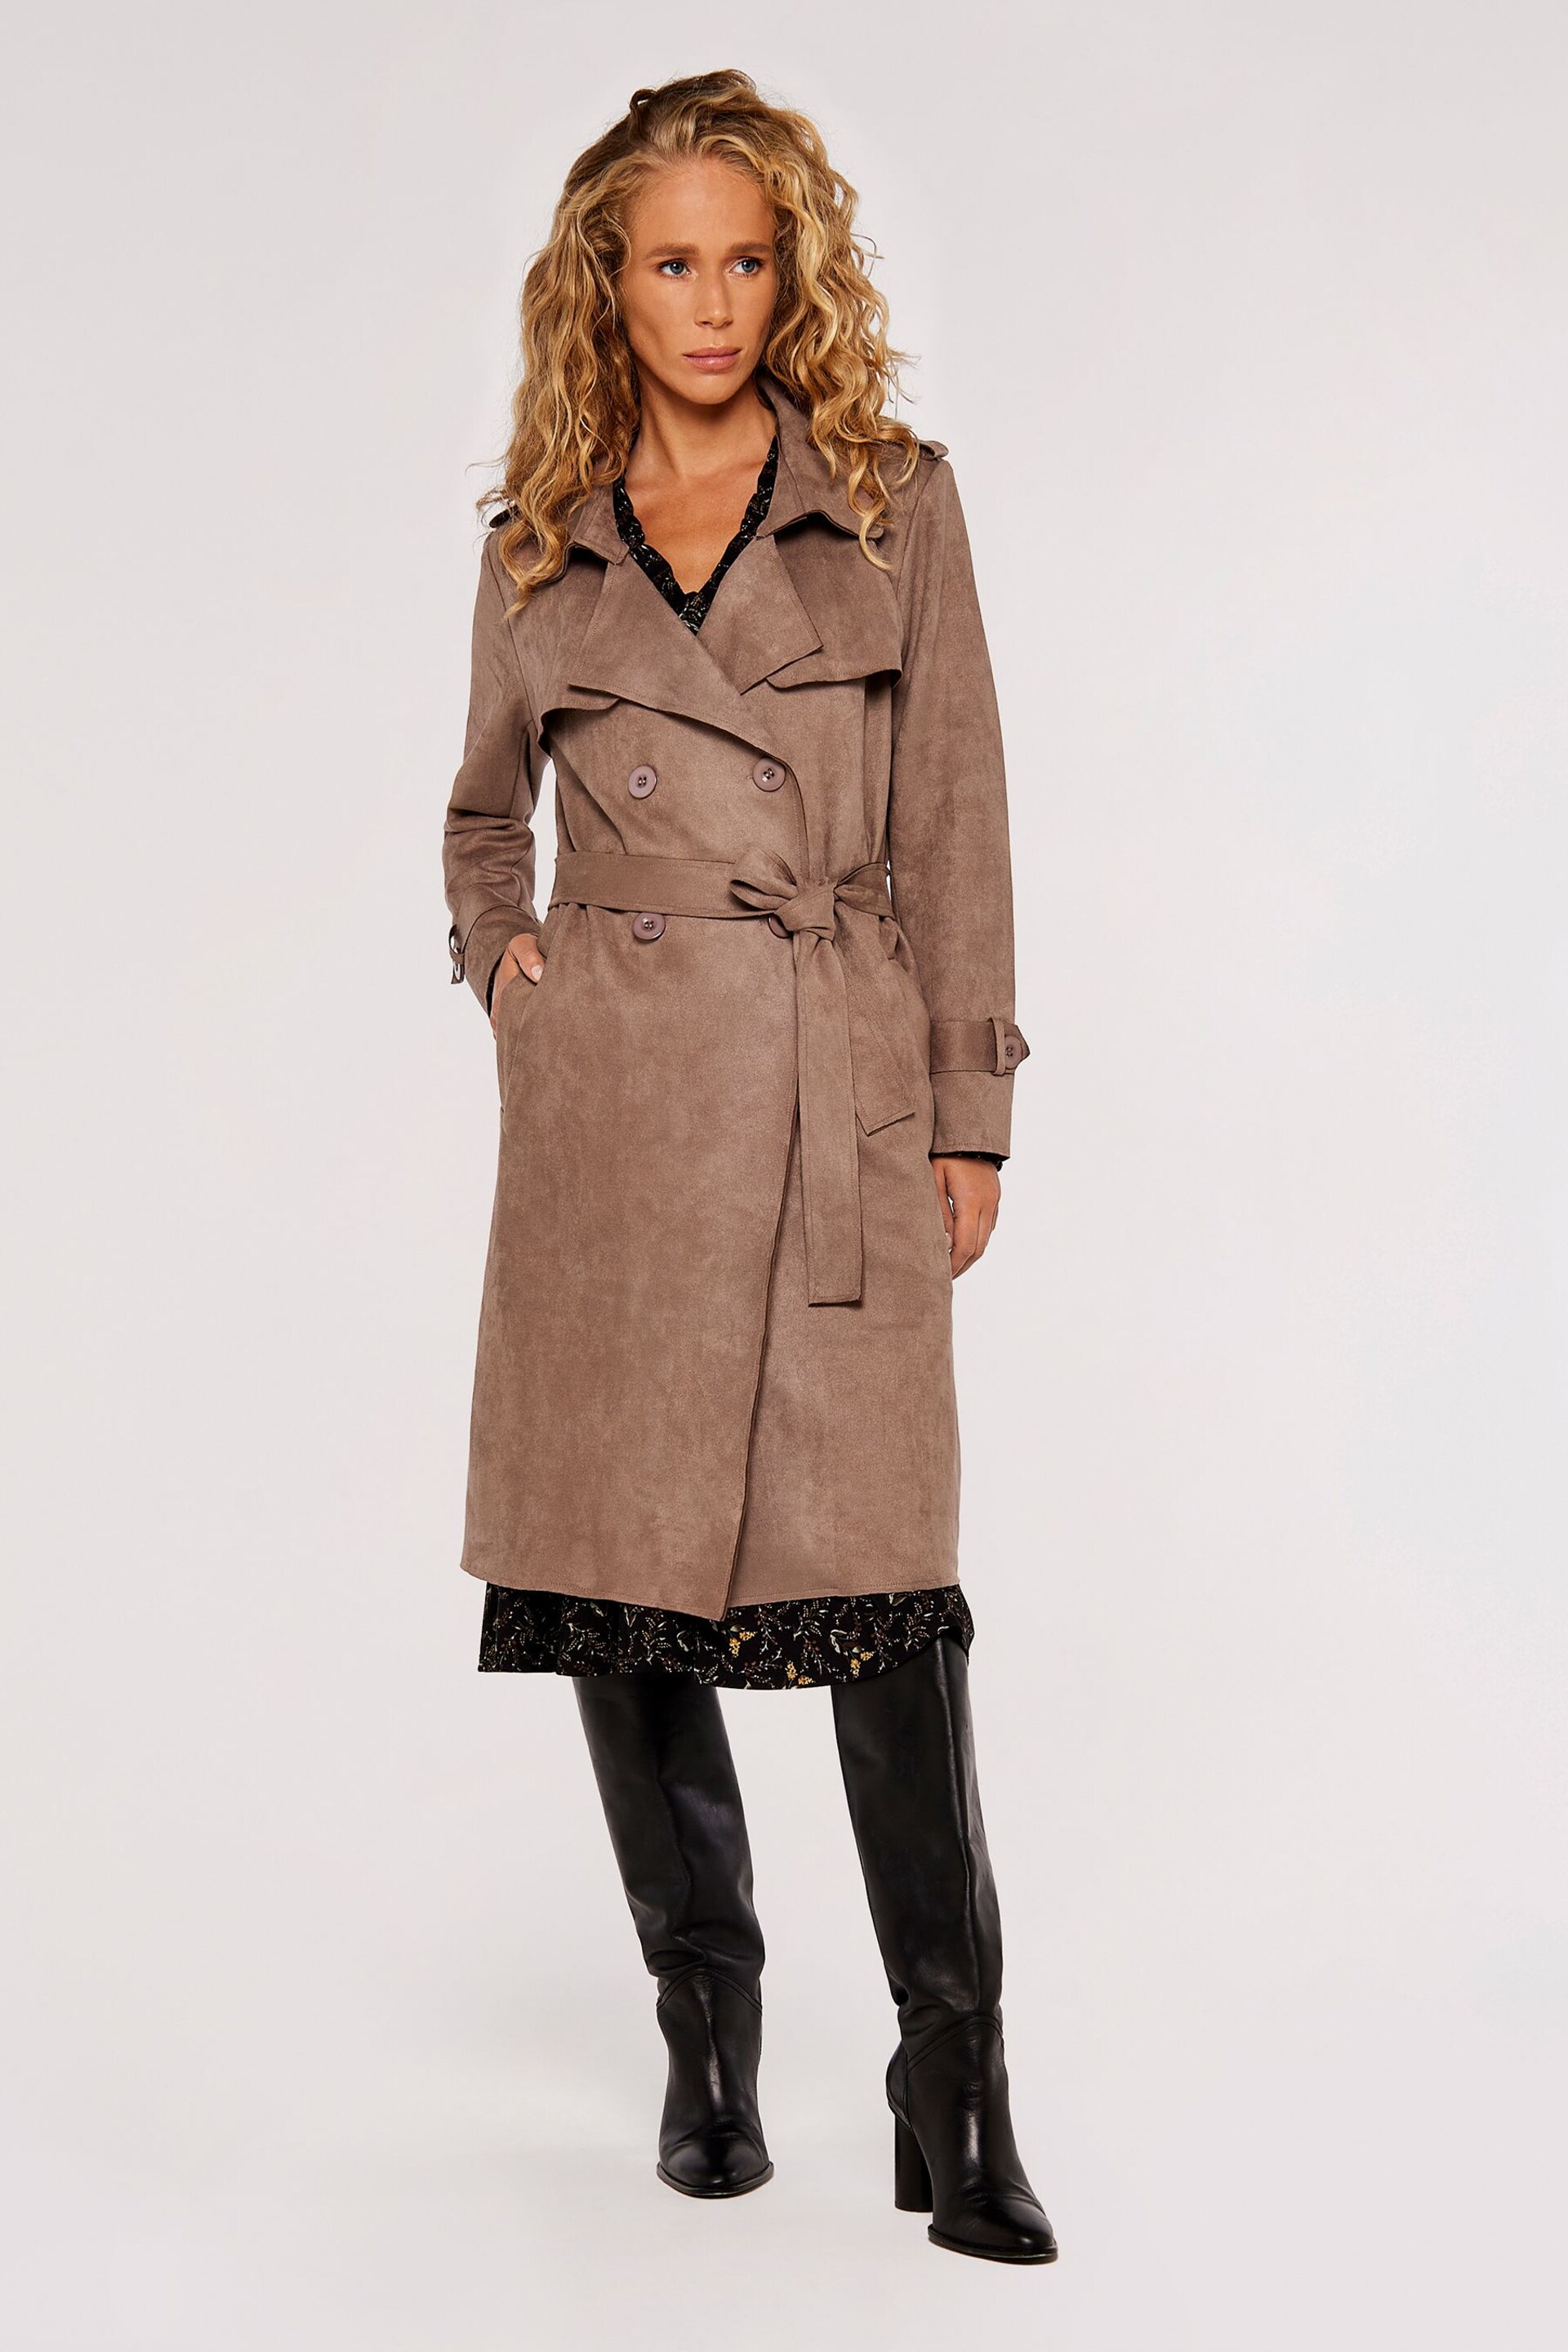 Apricot Brown Faux Suede Double Breasted Trench Coat - Image 2 of 4